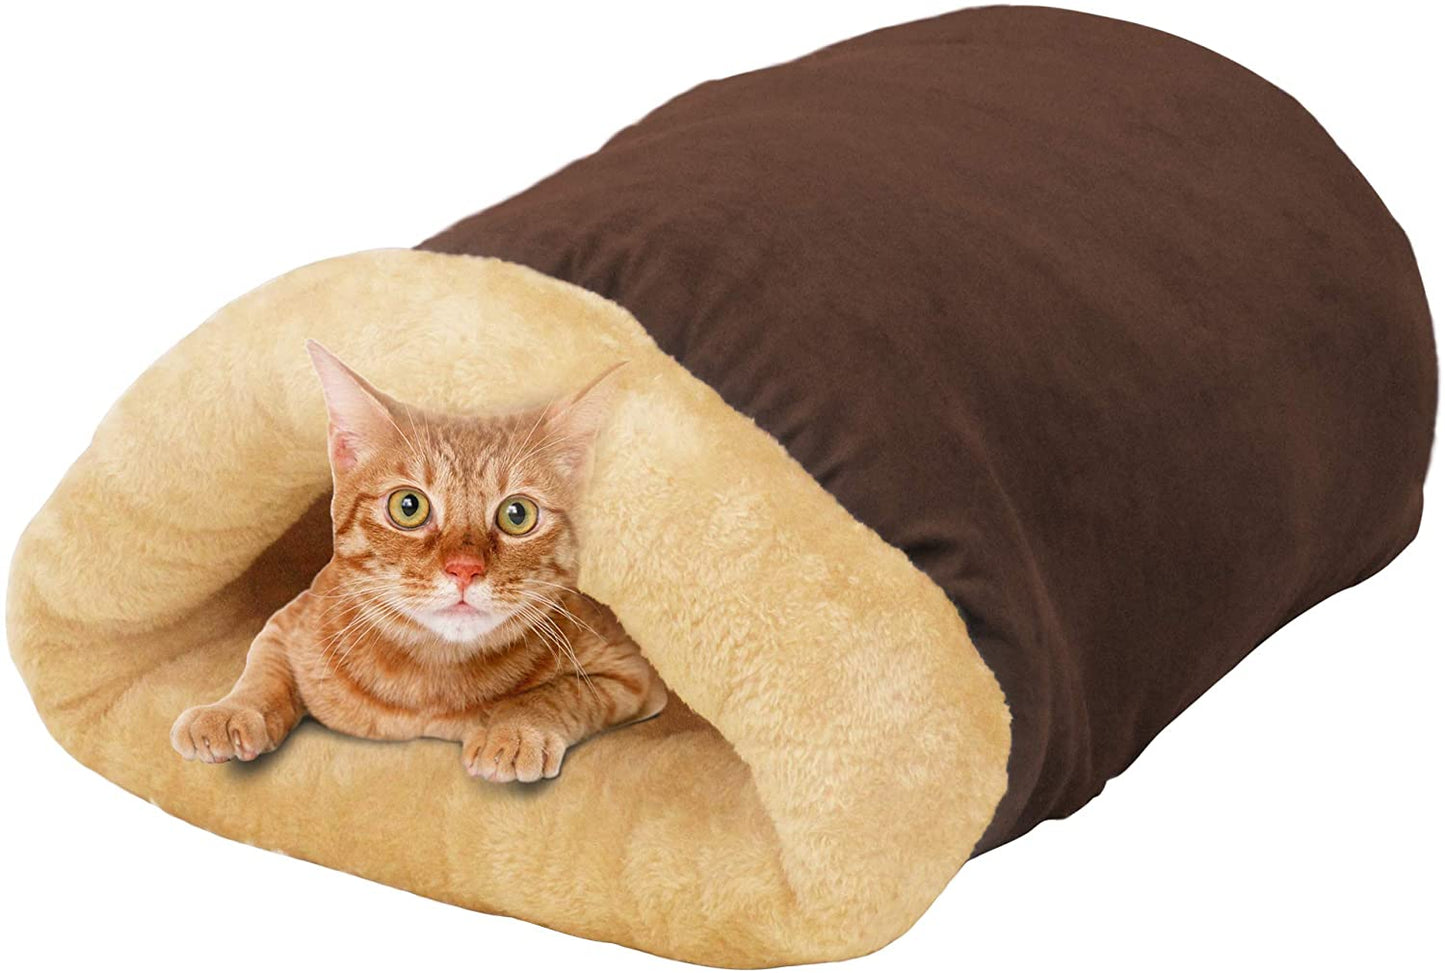 GOOPAWS 4 in 1 Self Warming Burrow Covered Cat & Dog Bed, Pet Hideway Sleeping Cuddle Cave